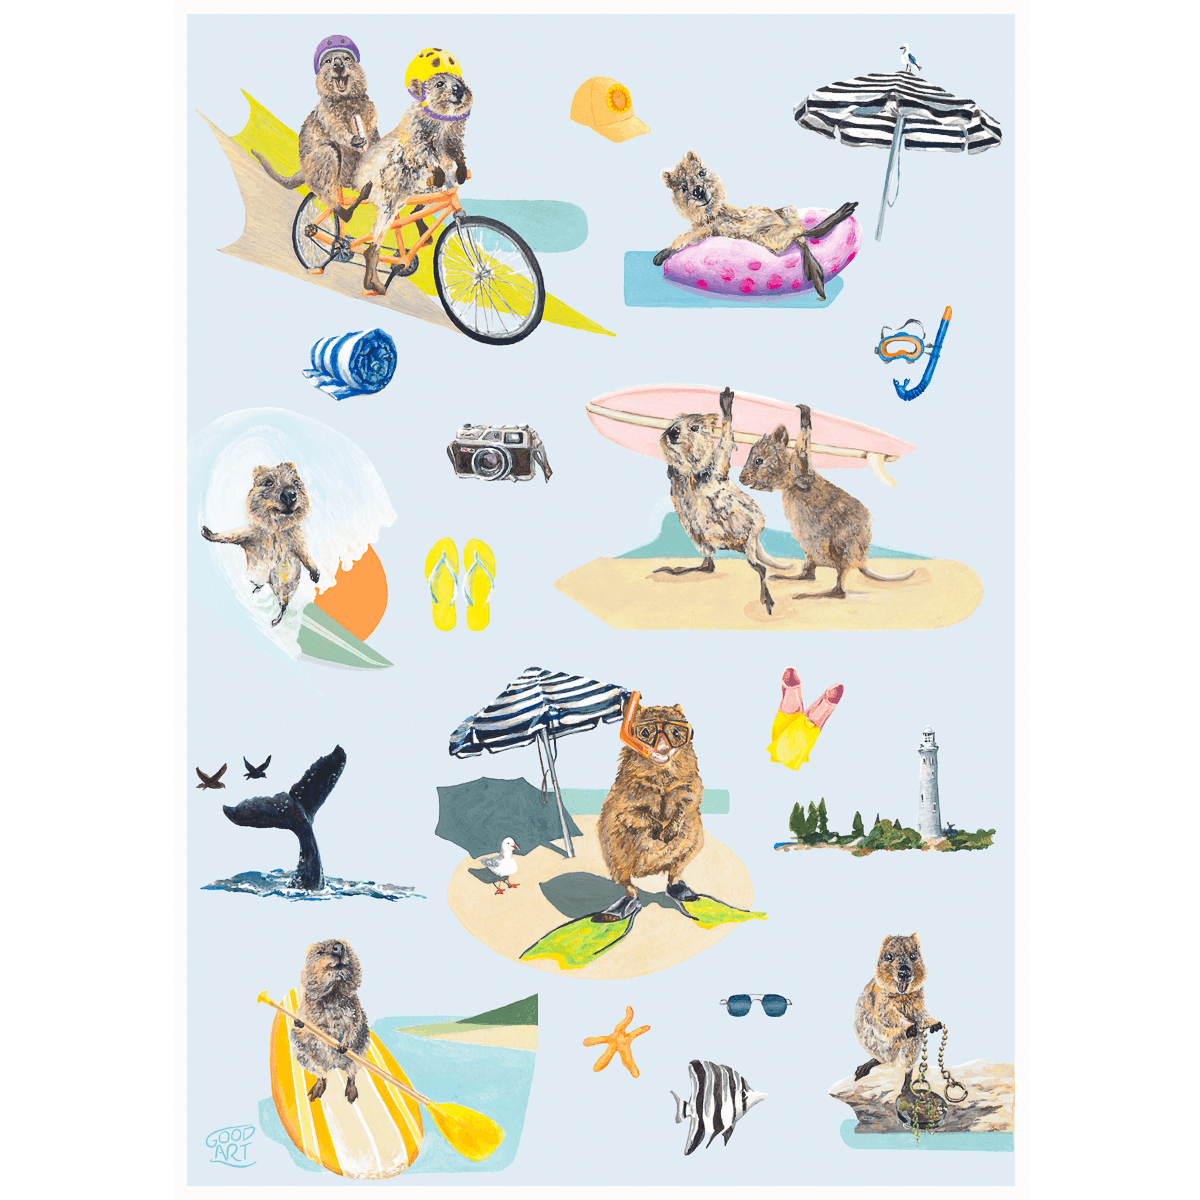 Seven quokka’s doing various Rottnest Island holiday activities; biking, surfing, snorkelling, stand-up paddle boarding.